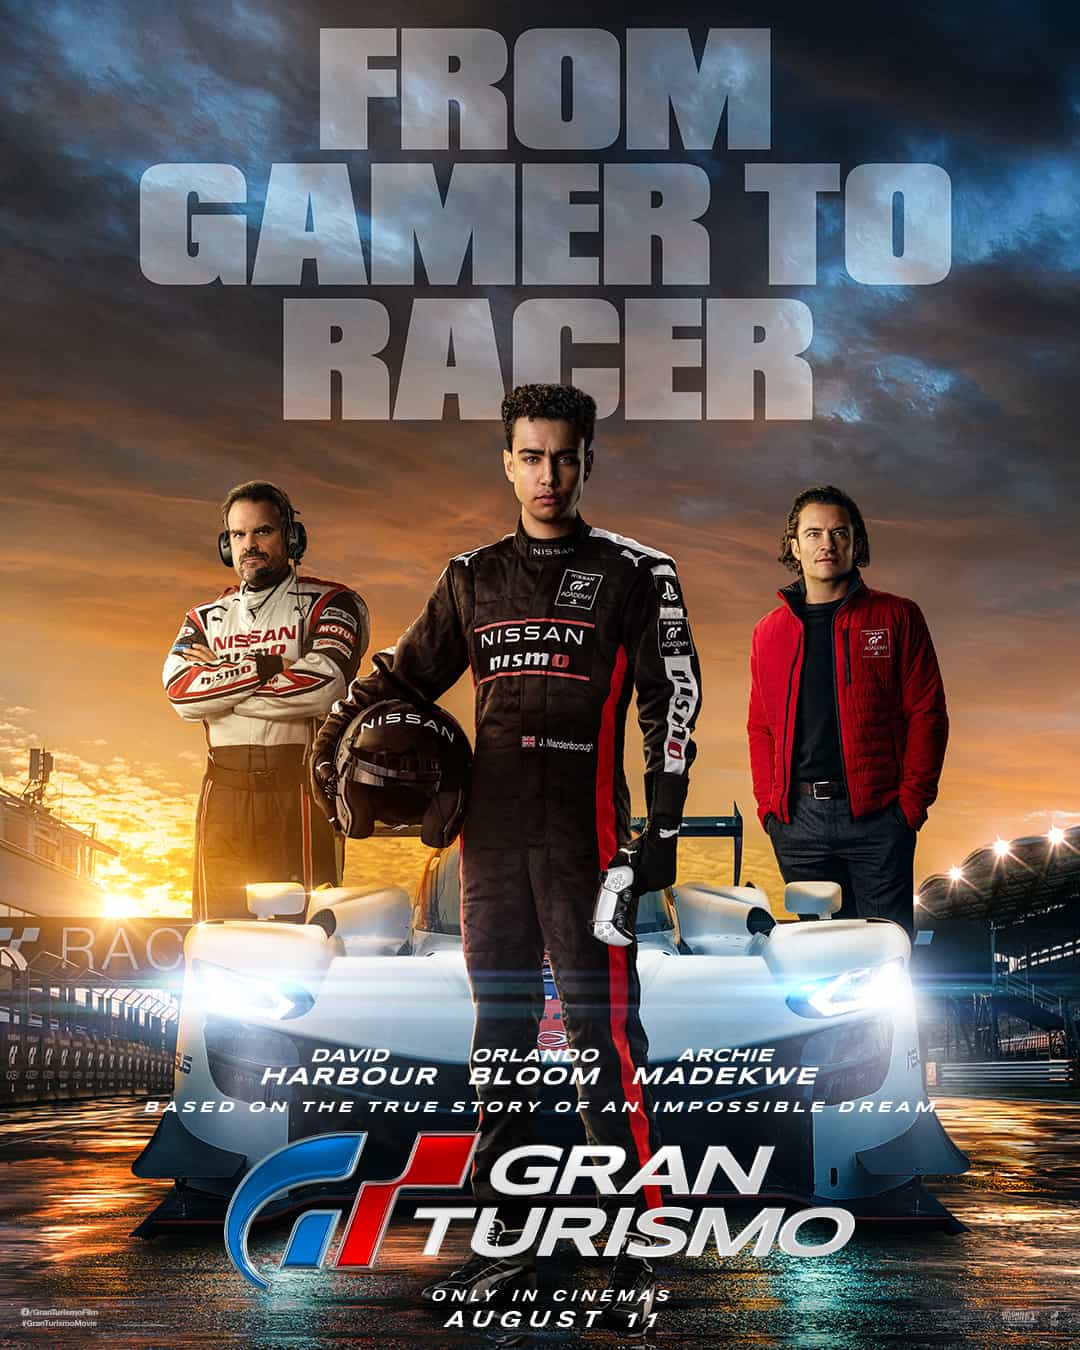 Gran Turismo is given a 12A age rating in the UK for moderate threat, infrequent strong language